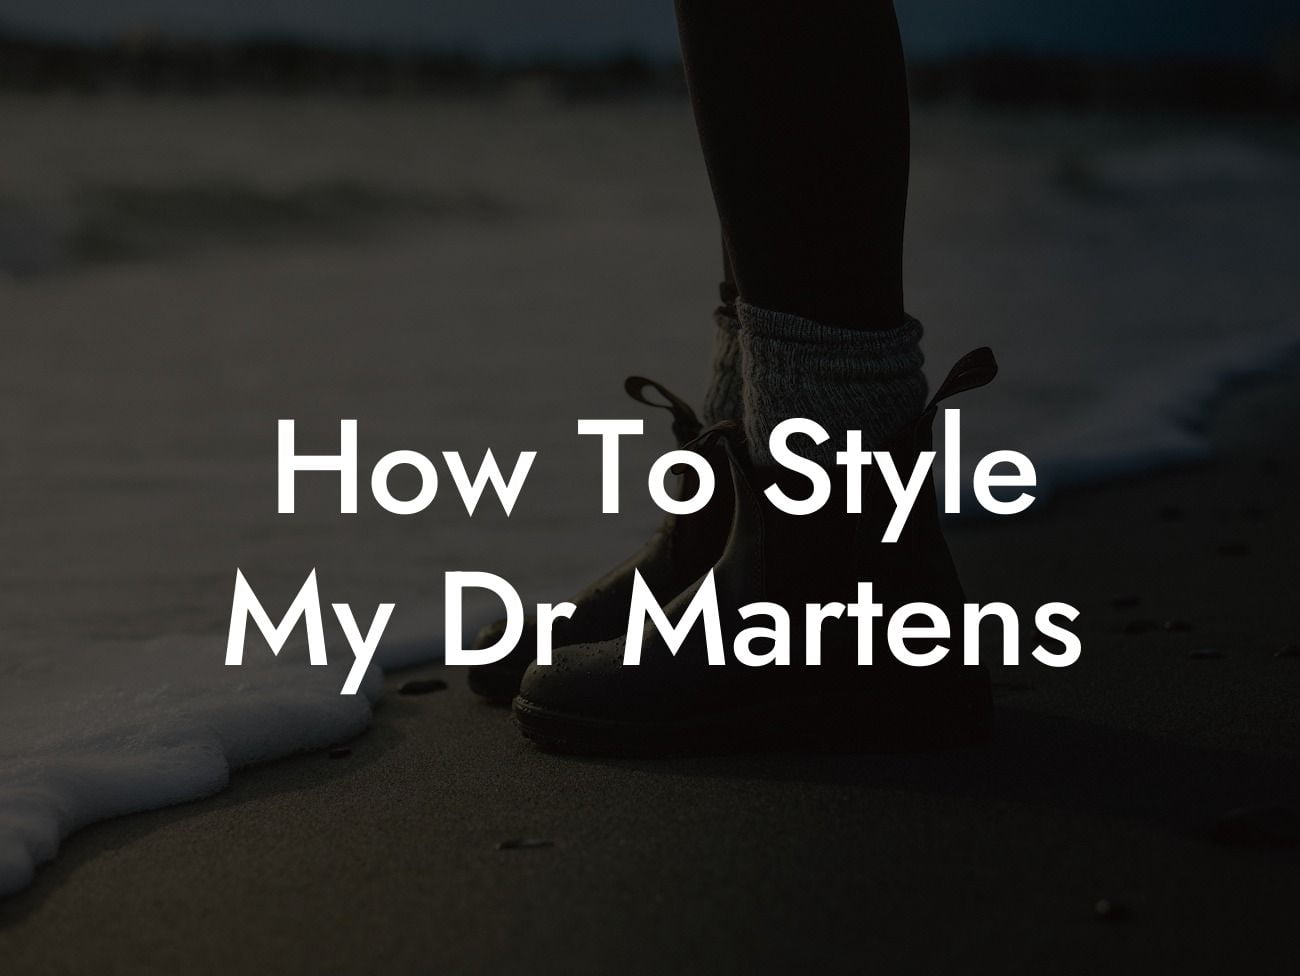 How To Style My Dr Martens